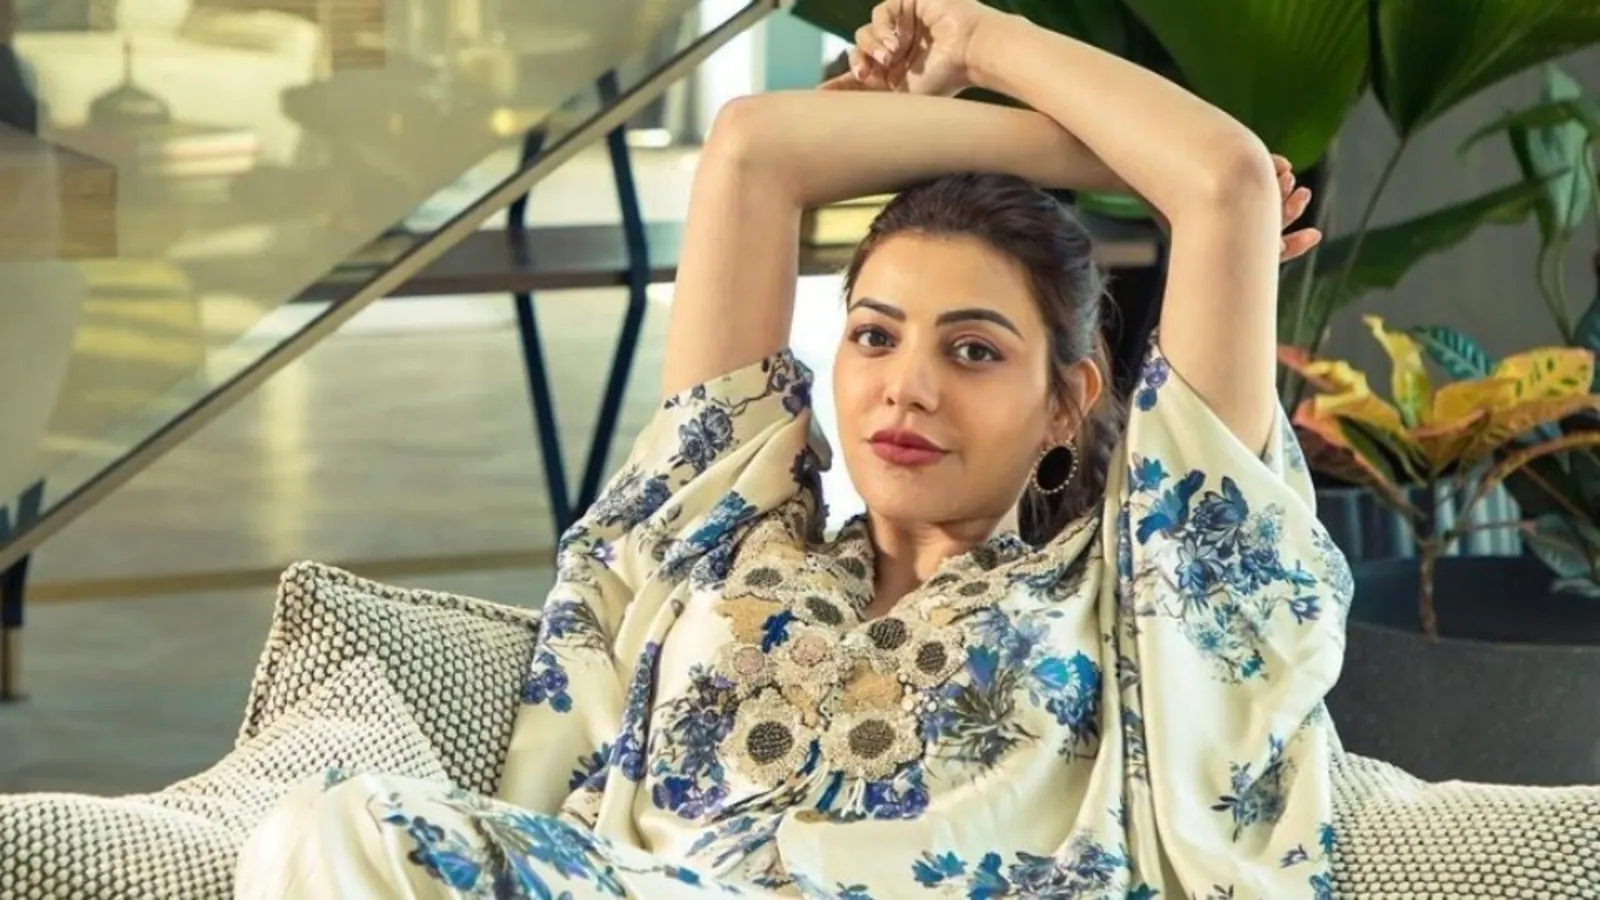 Pregnant Kajal Aggarwal is ‘just lounging around waiting for junior’ in beautiful floral kaftan suit: All pics here